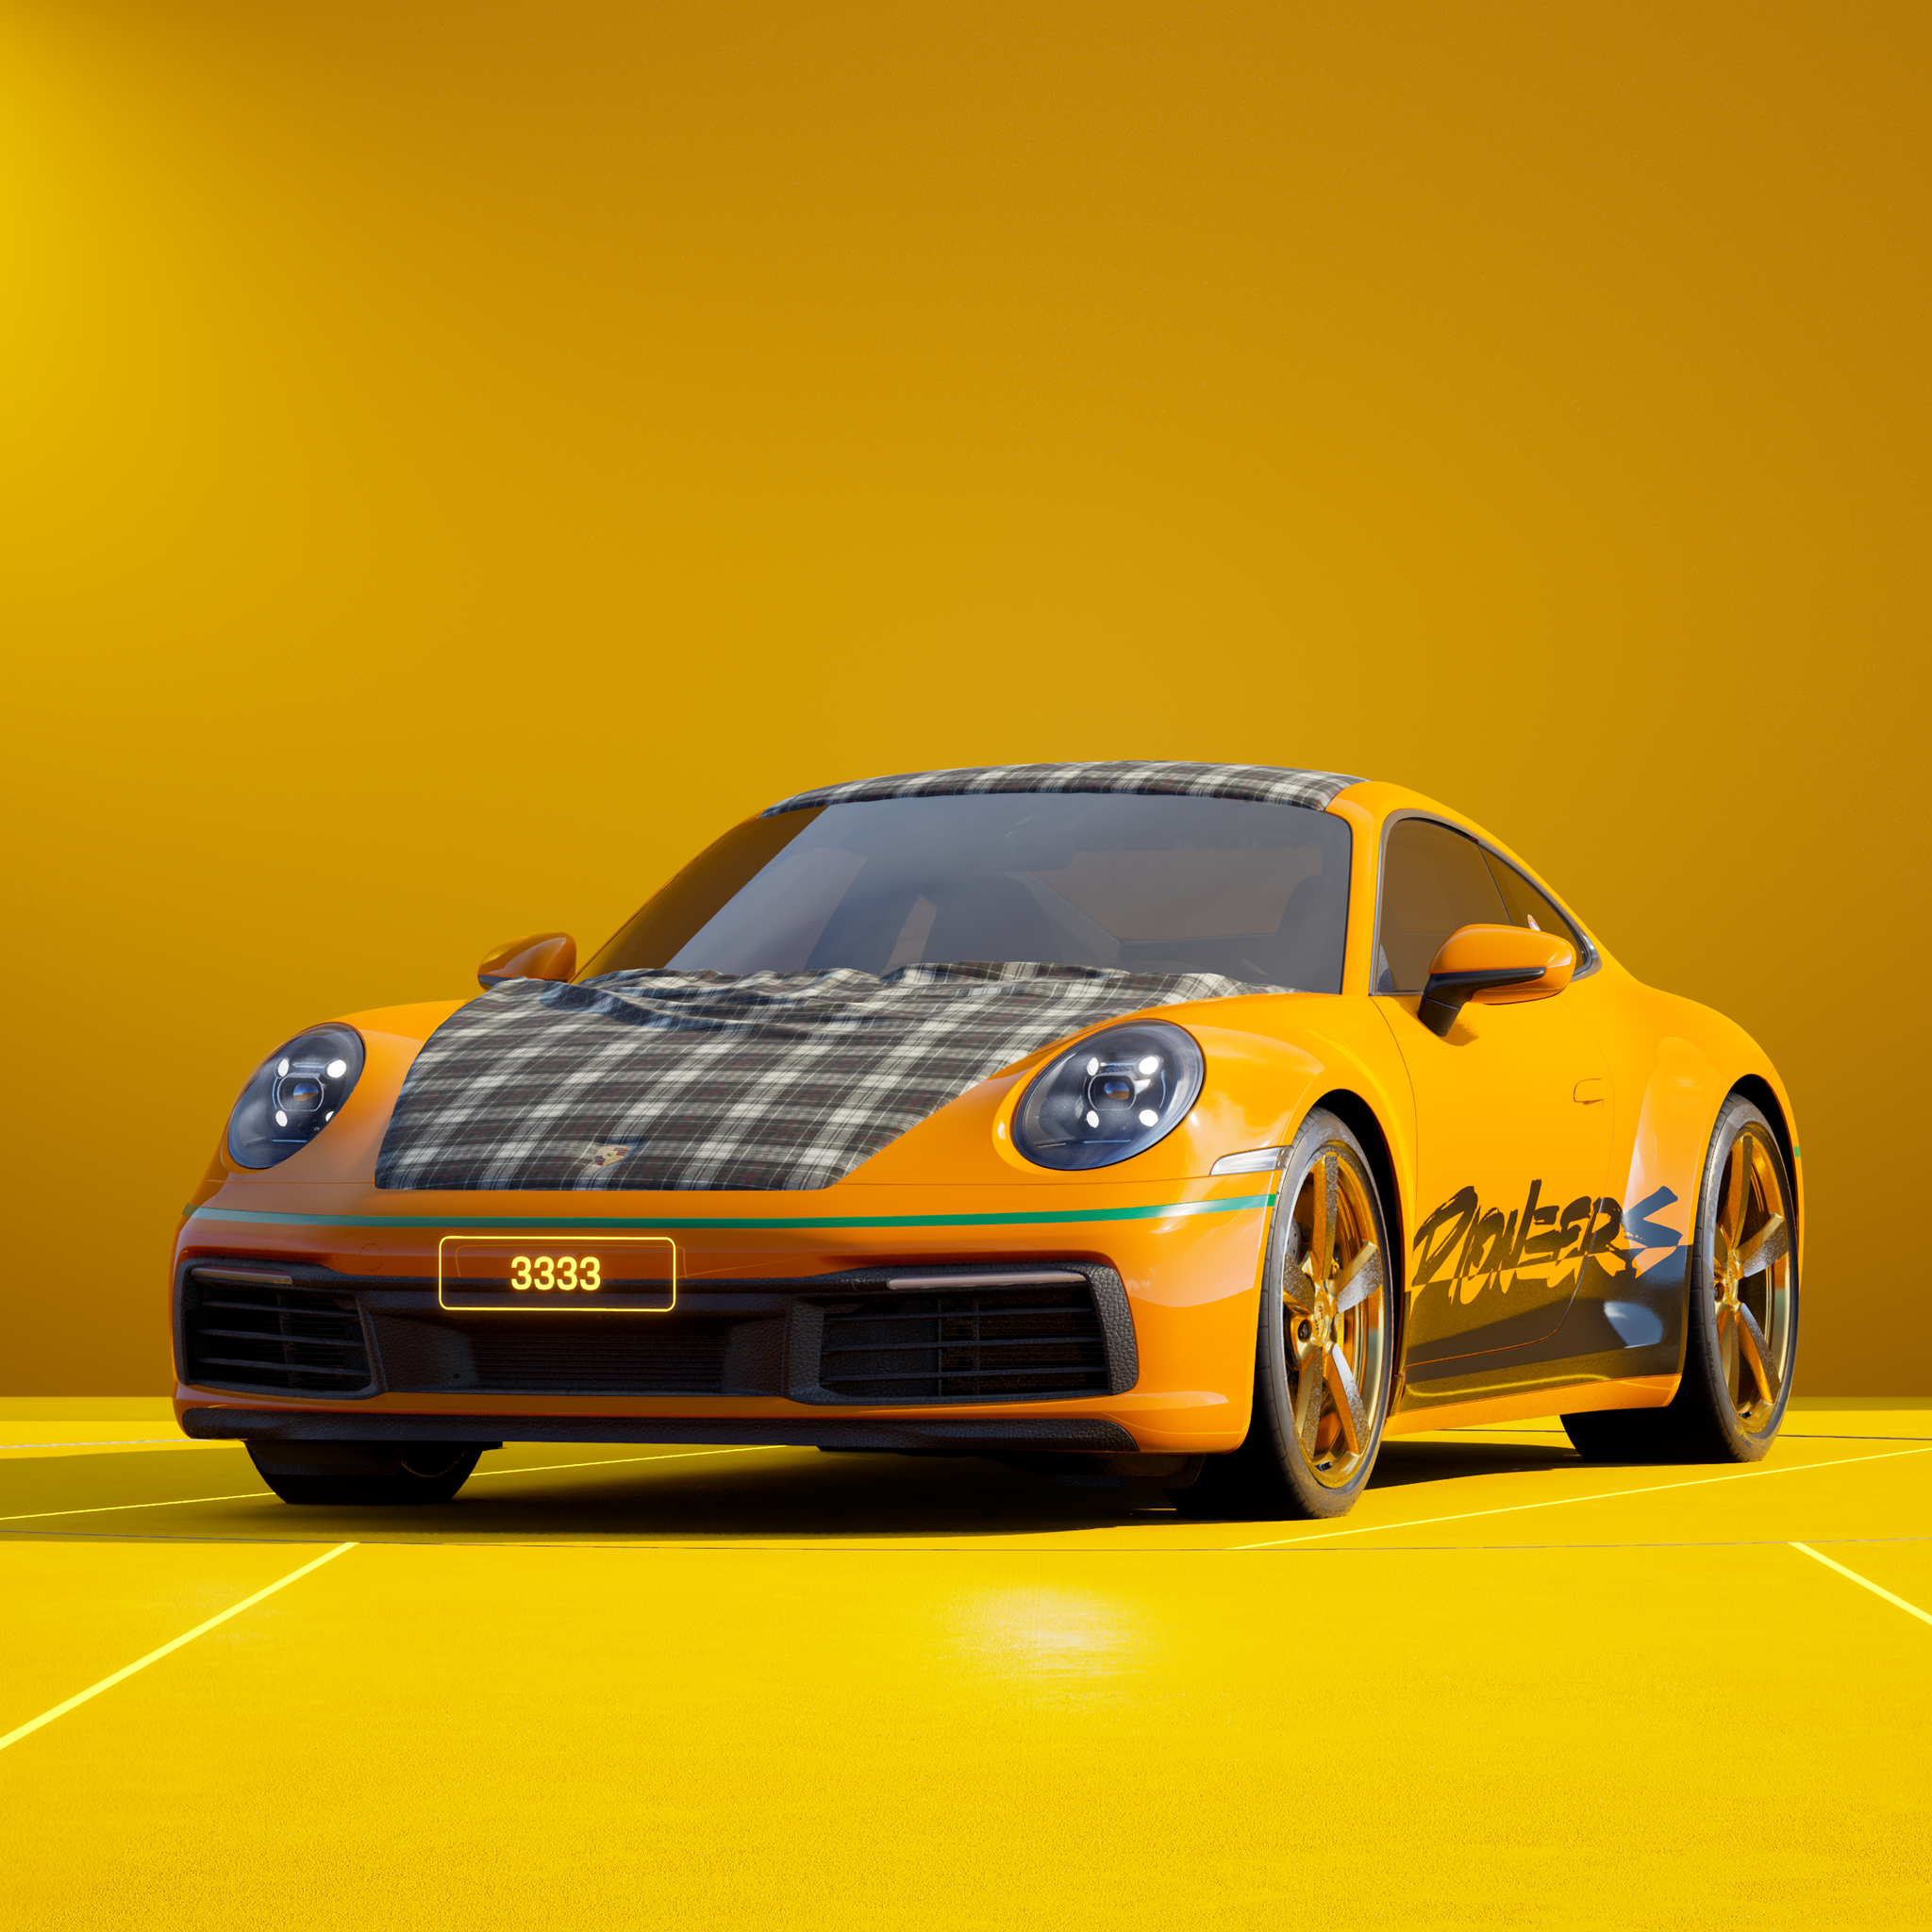 The PORSCHΞ 911 3333 image in phase